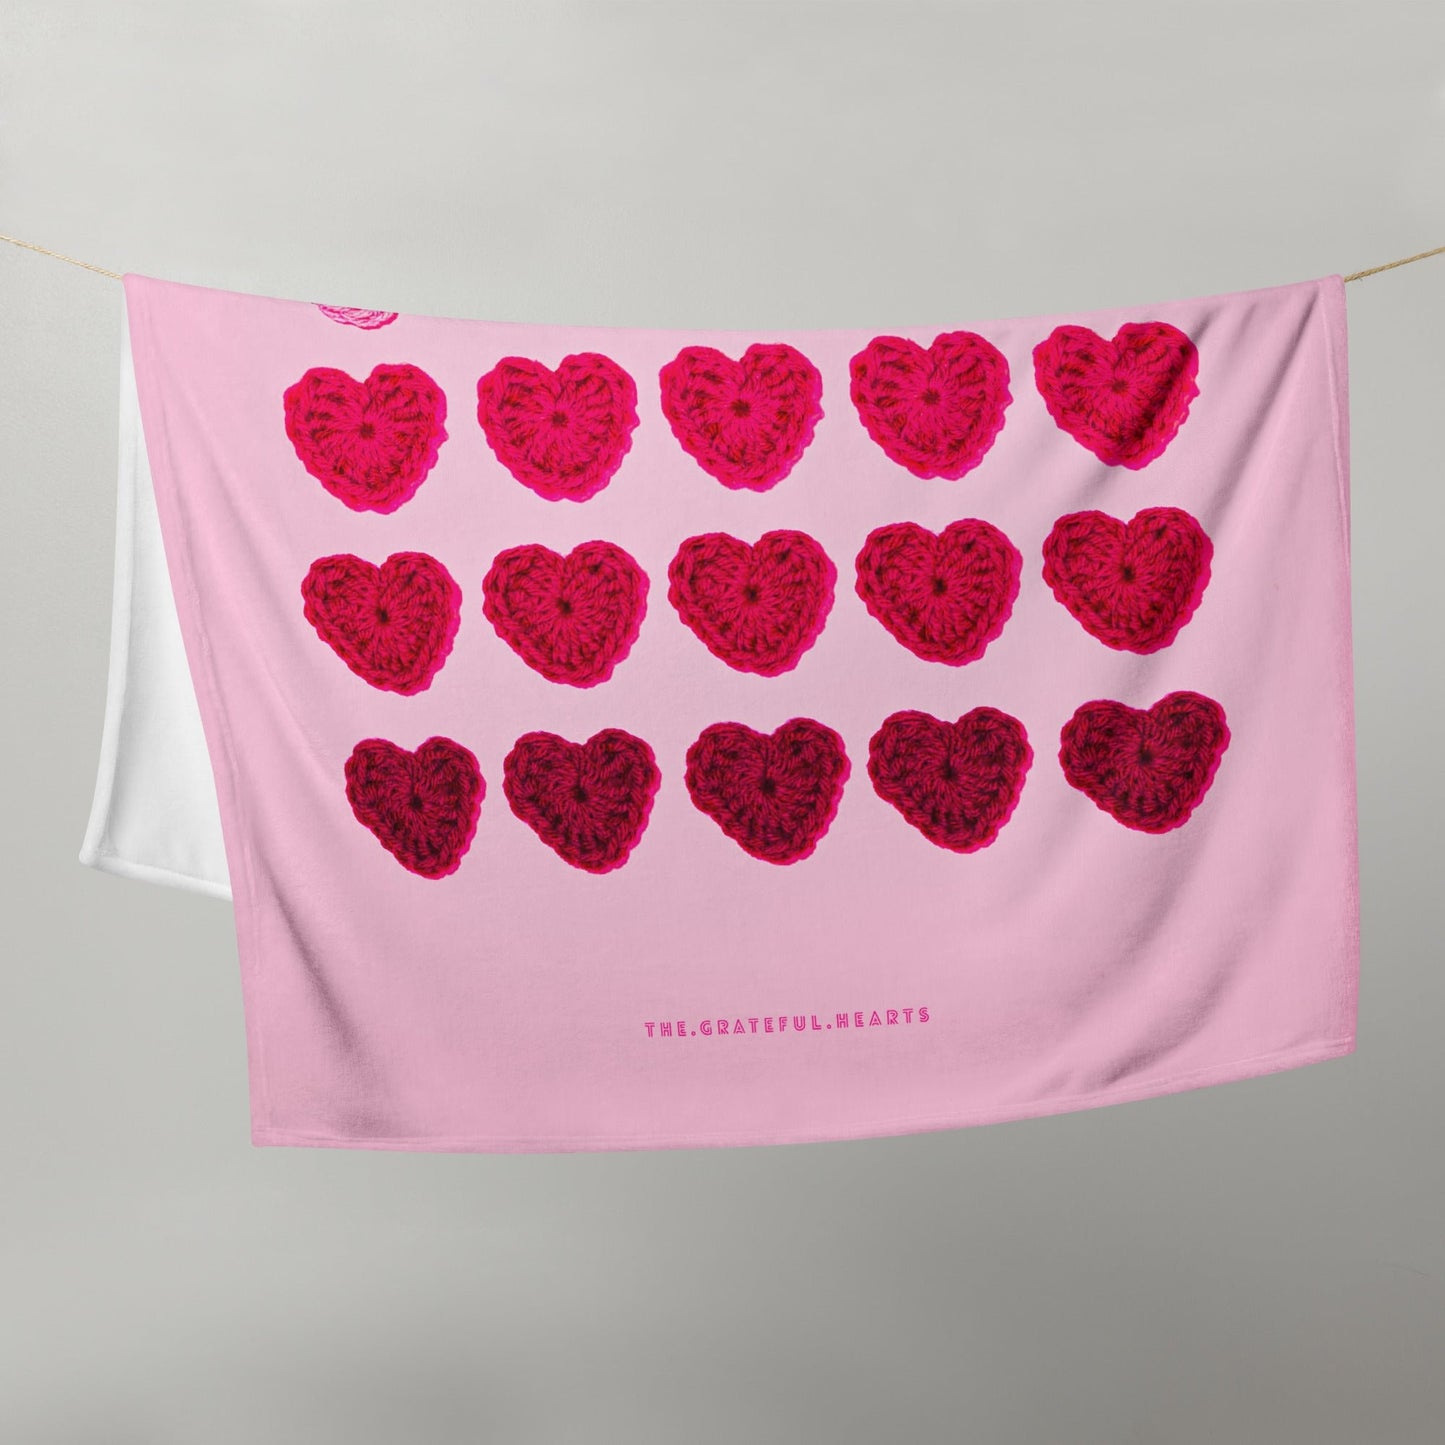 Fabric Hearts ❤️ Throw Blanket - The Grateful Hearts